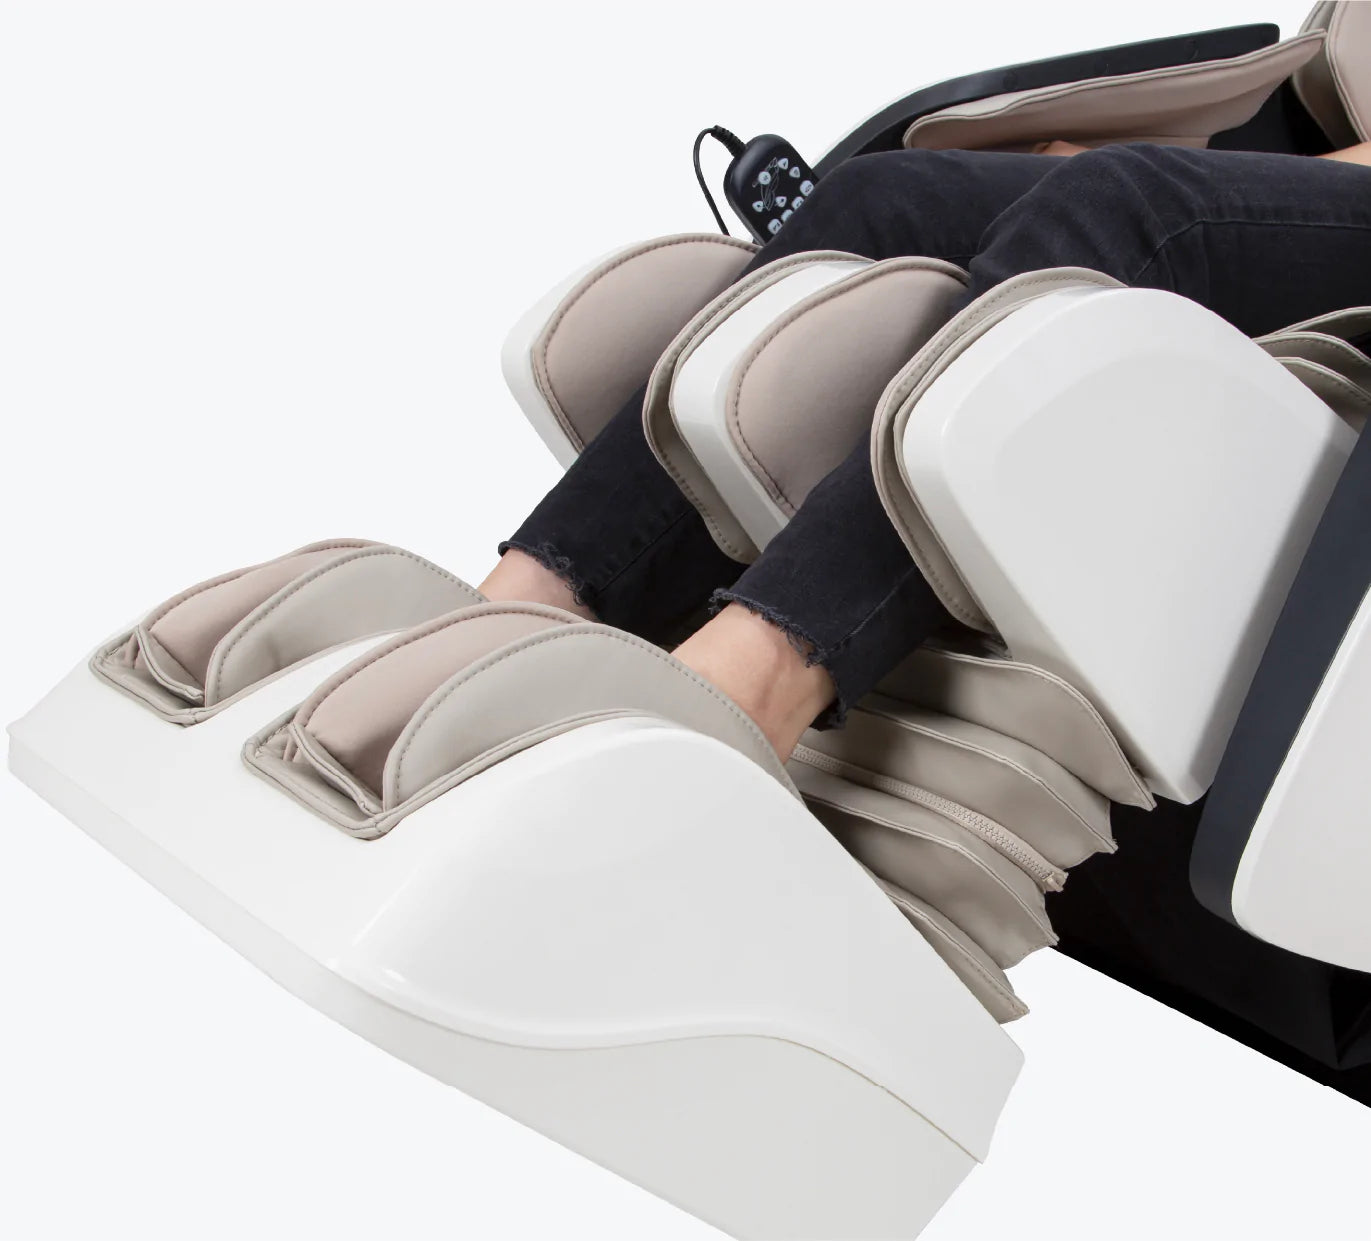 The Osaki Vista Massage Chair includes an extendable footrest that makes it easier to accommodate users of all heights.